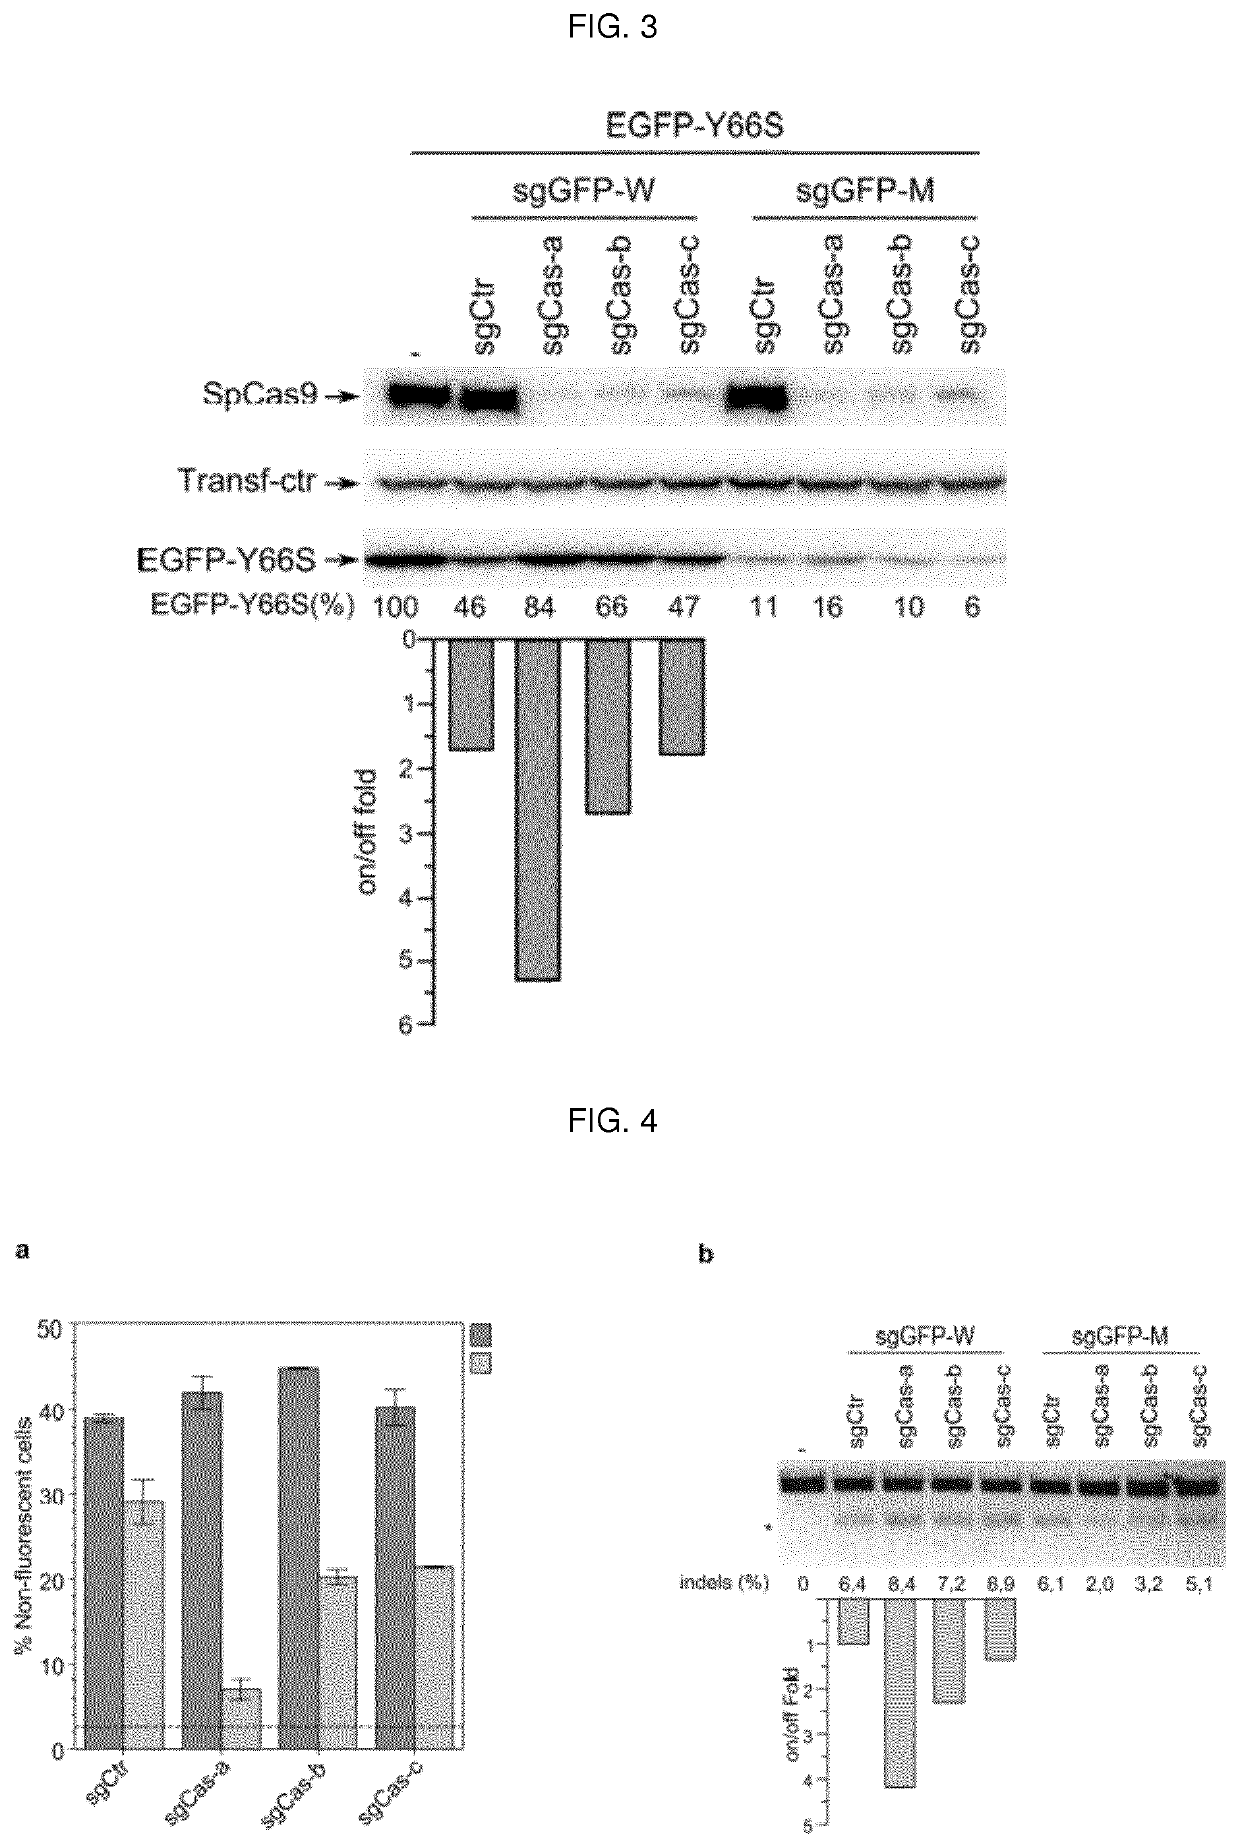 Self-limiting cas9 circuitry for enhanced safety (slices) plasmid and lentiviral system thereof